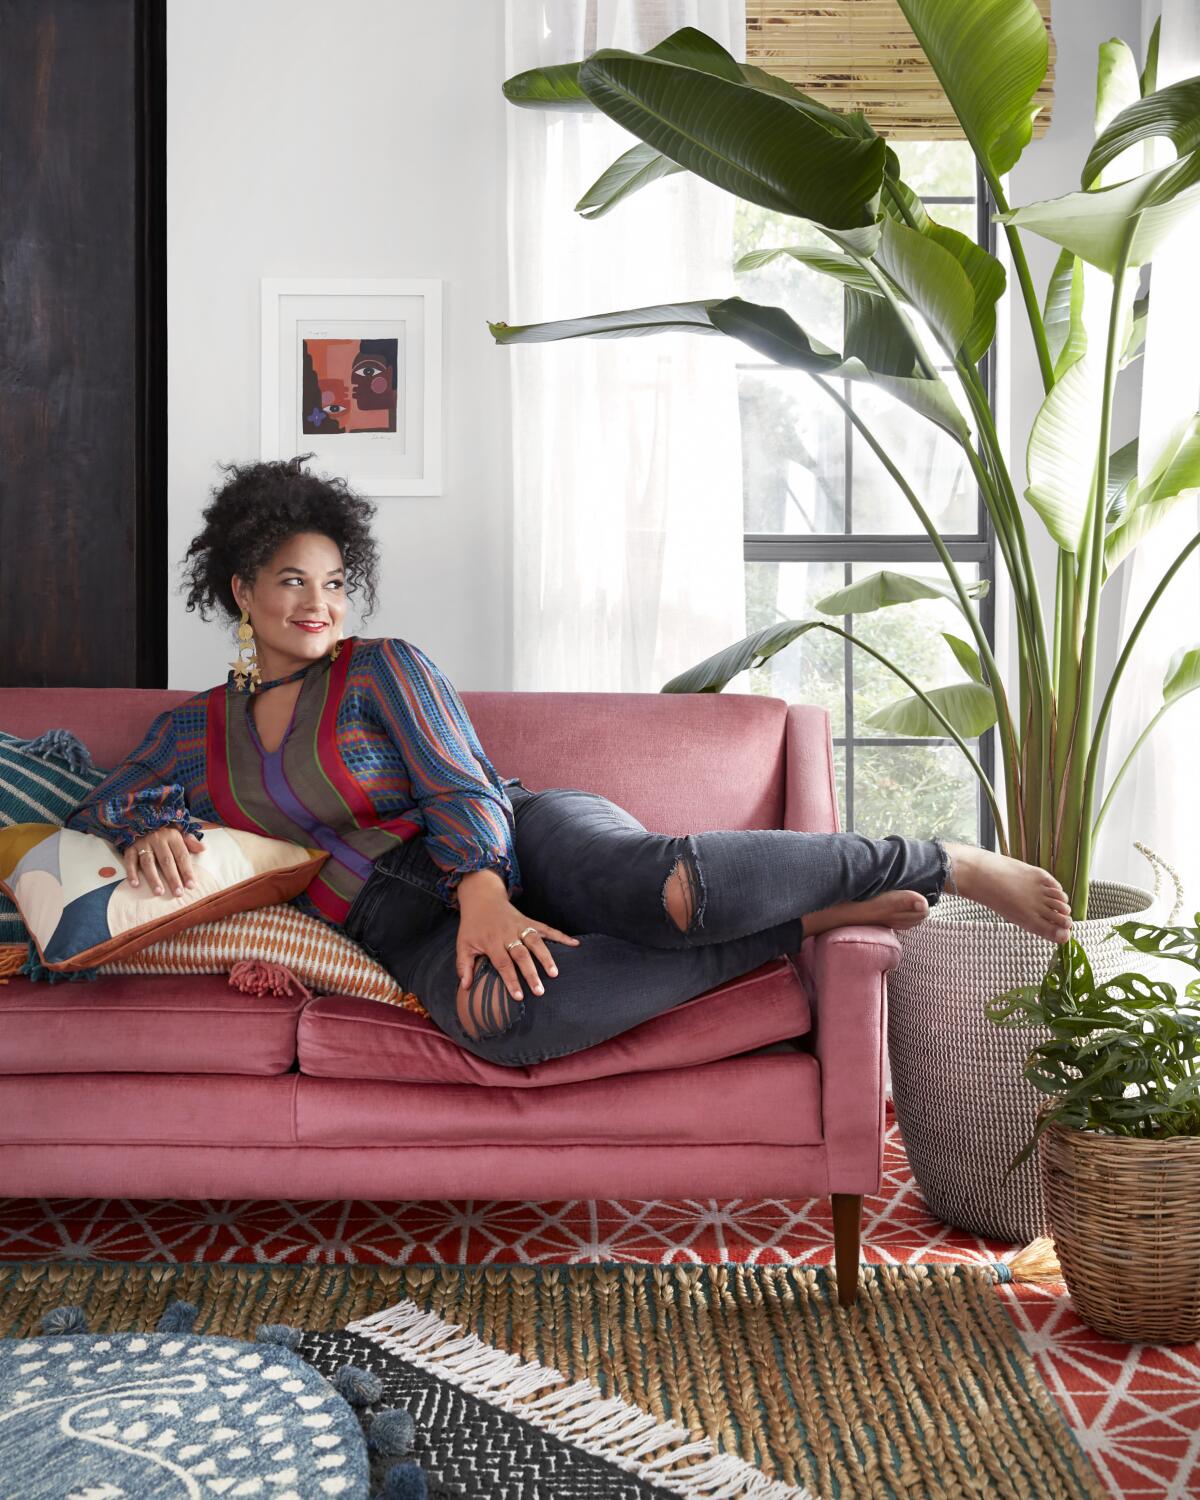 Designer Justina Blakeney reclines on a couch at home with her plants.